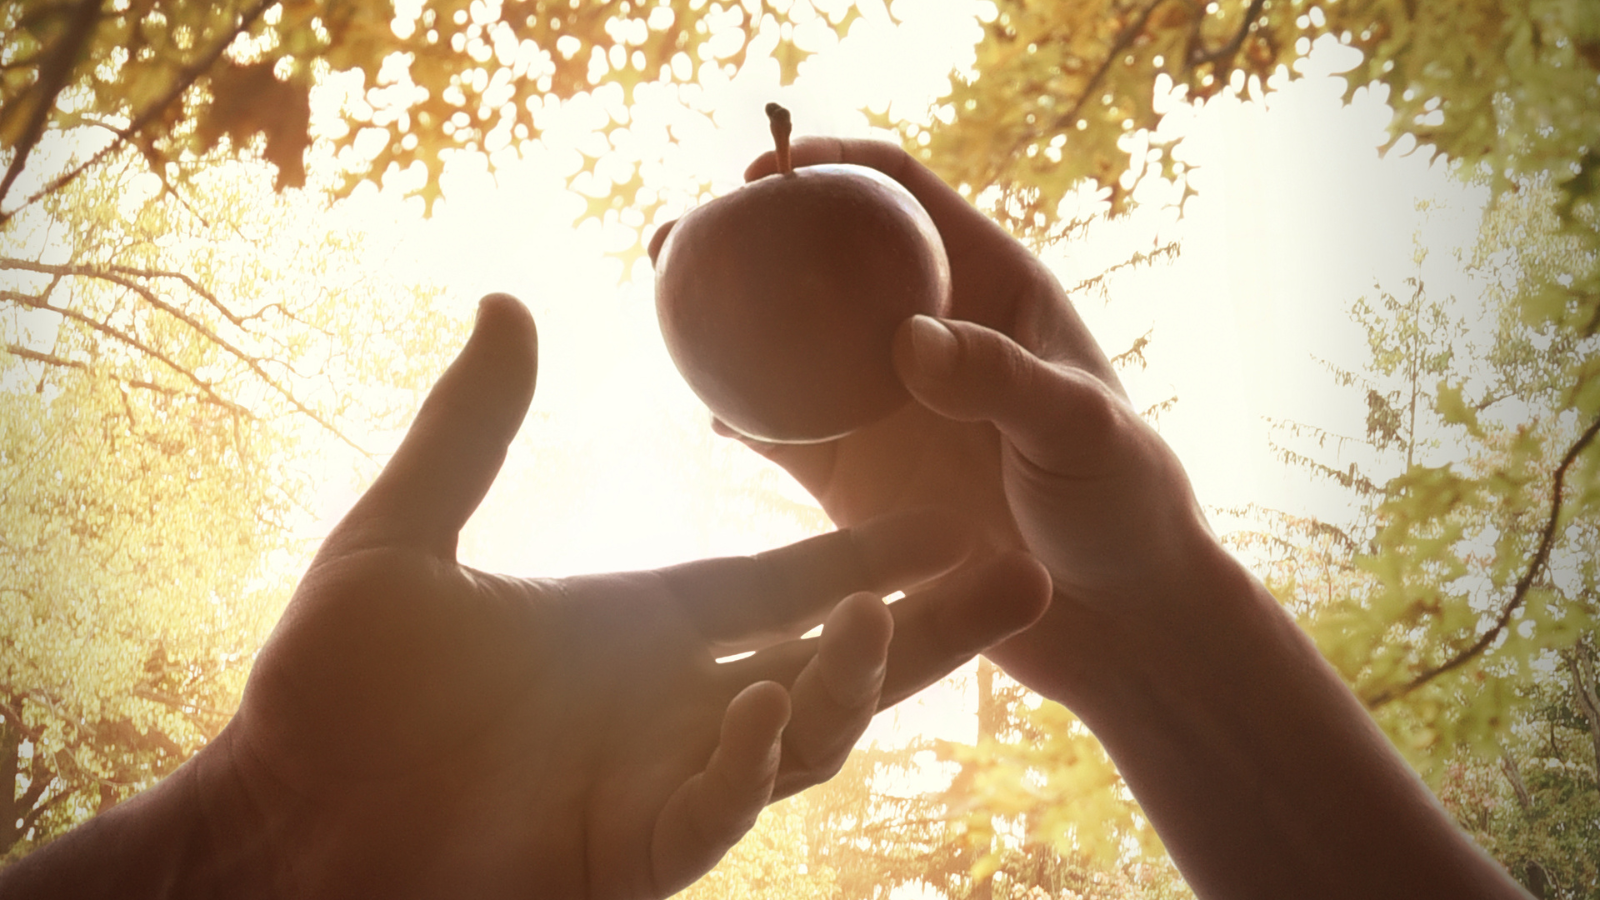 Woman holding an apple out to a man